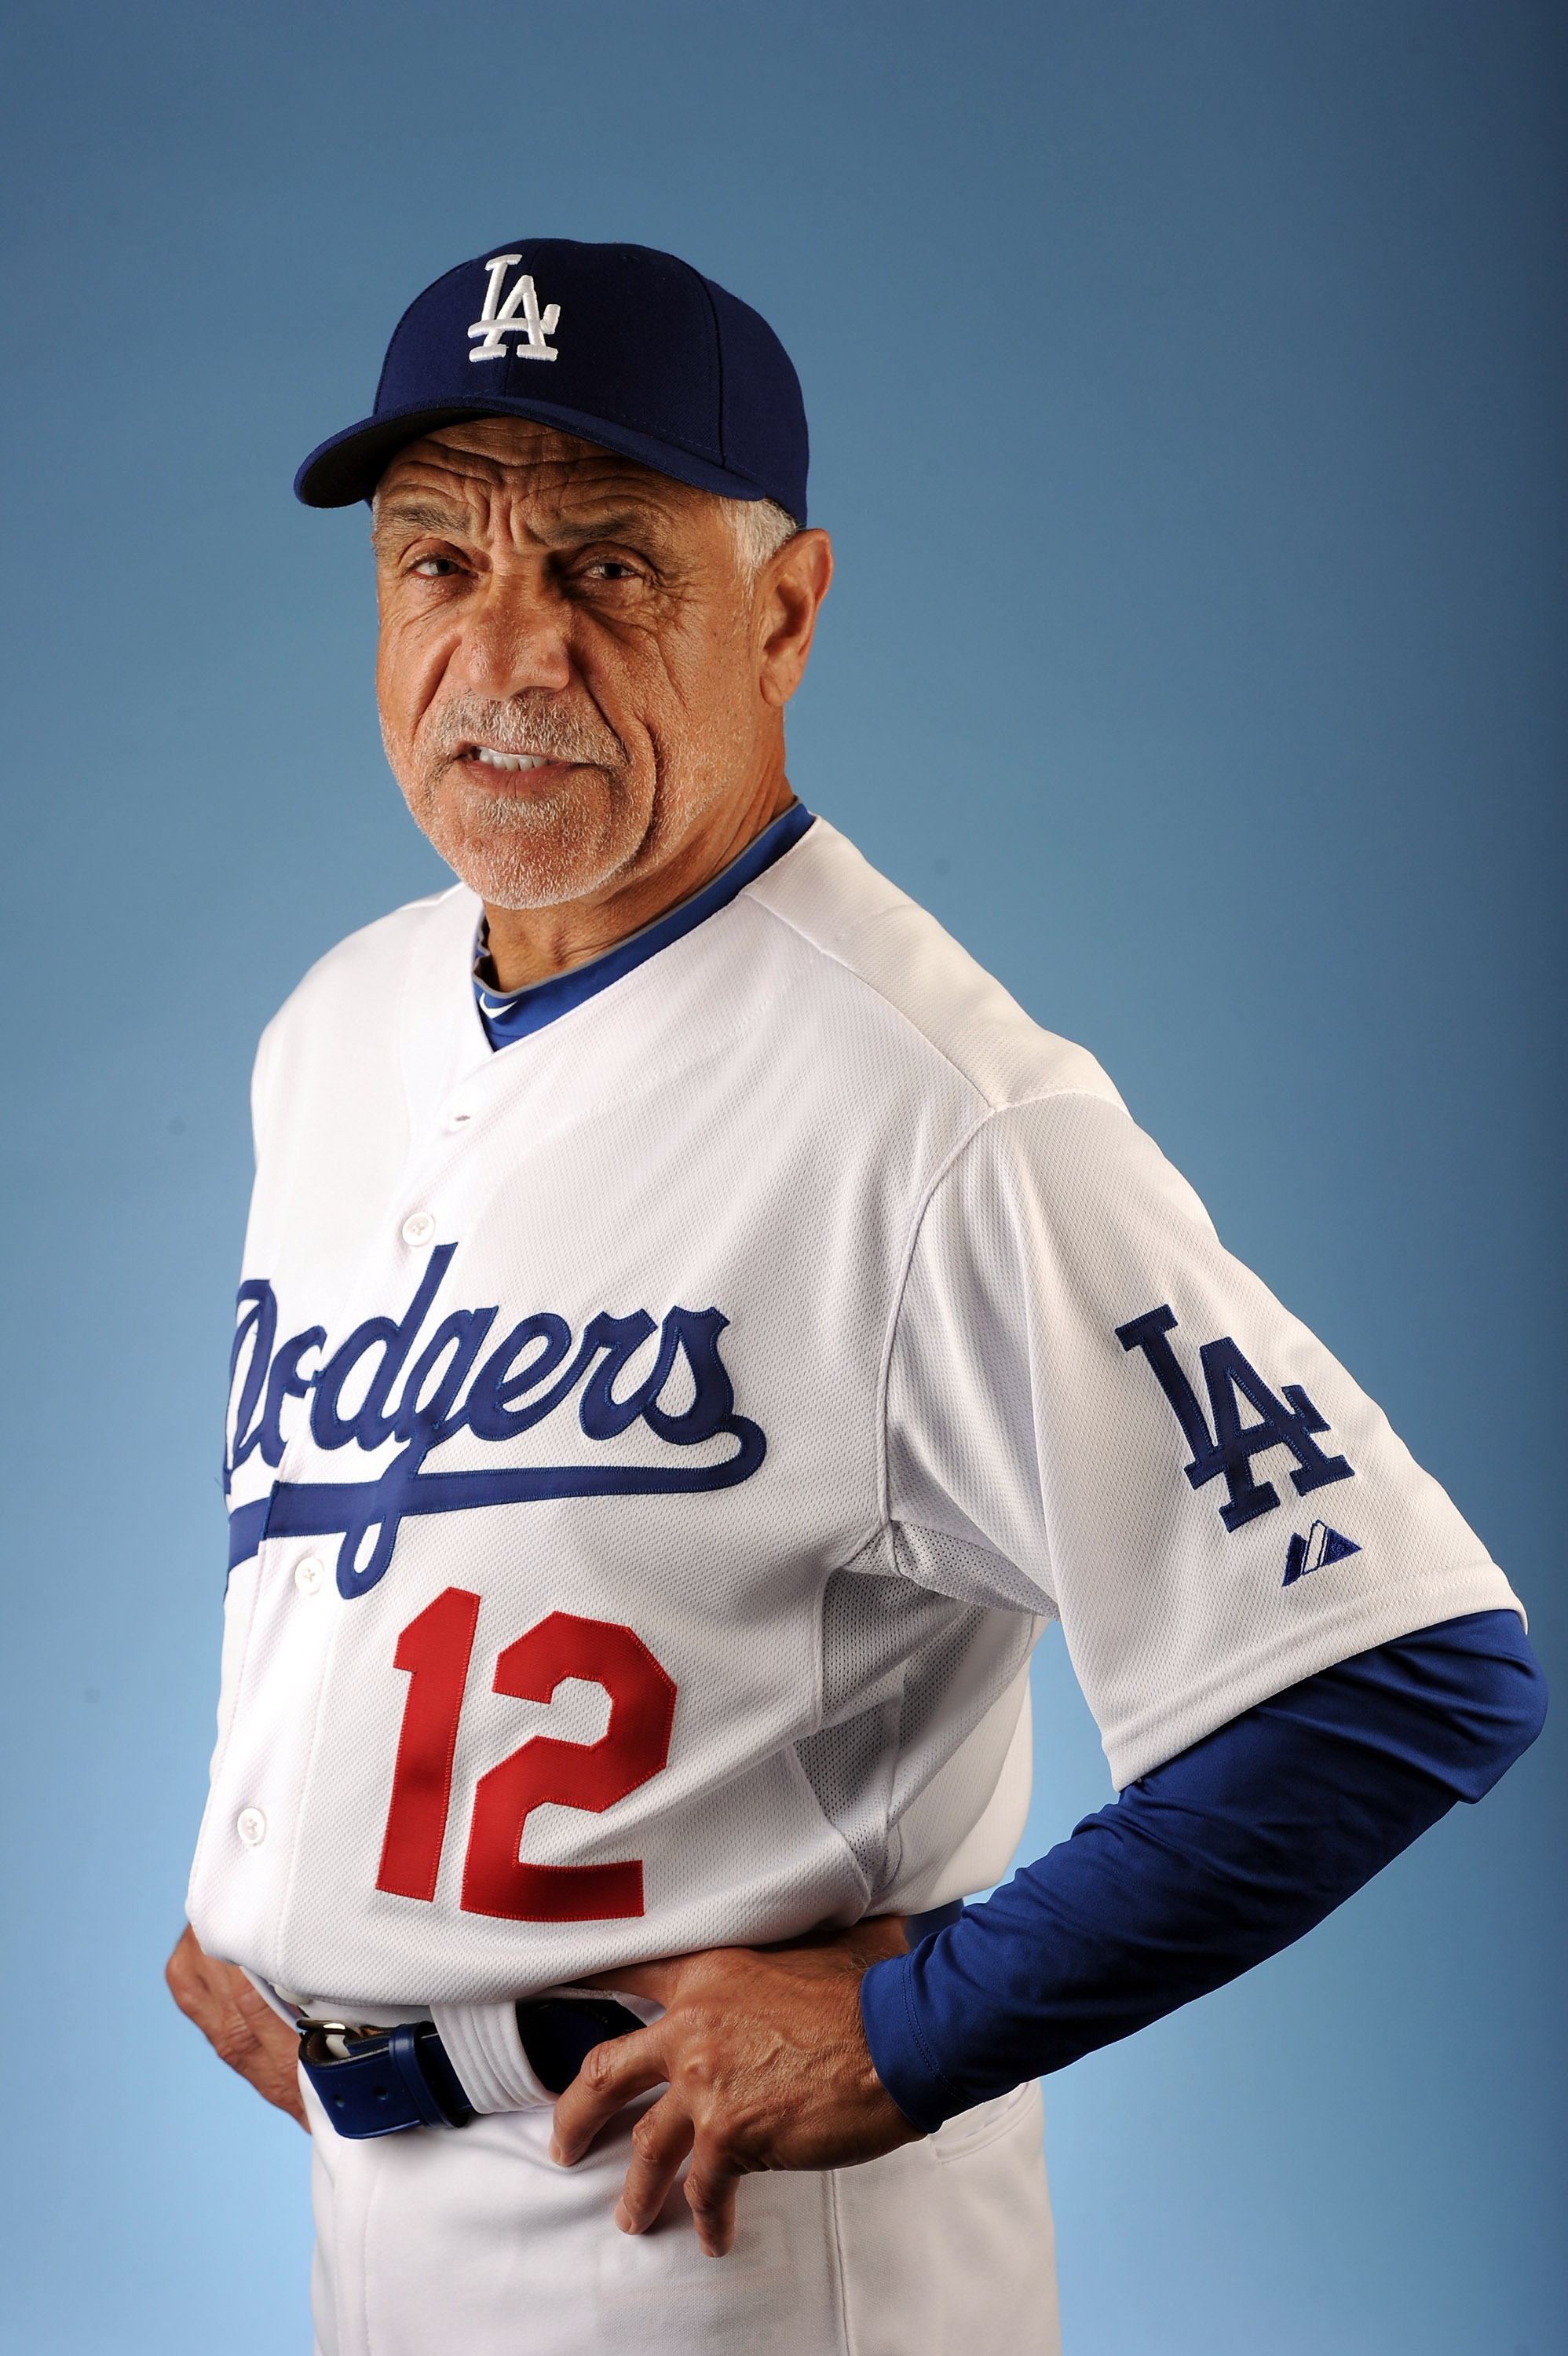 GLENDALE, AZ - FEBRUARY 25:  Davey Lopes #12 of the Los Angeles Dodgers poses for a photo on photo day at Camelback Ranch on February 25, 2011 in Glendale, Arizona.  (Photo by Harry How/Getty Images)